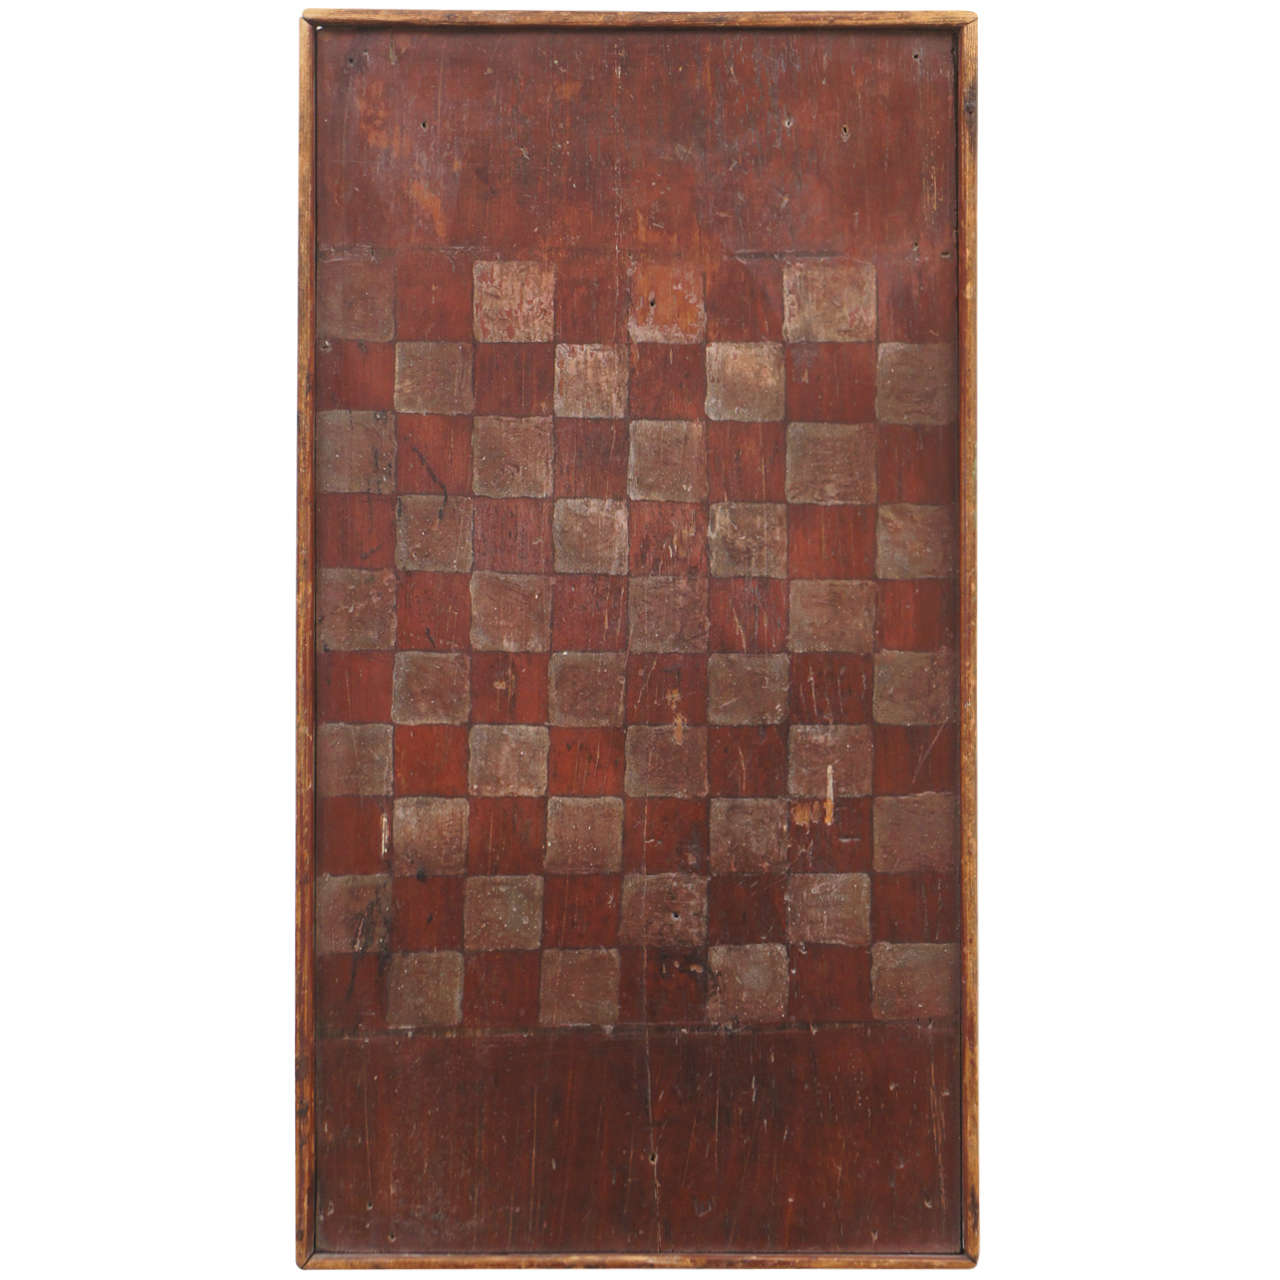 Canadian Game Board Called as Draughts, circa 1860